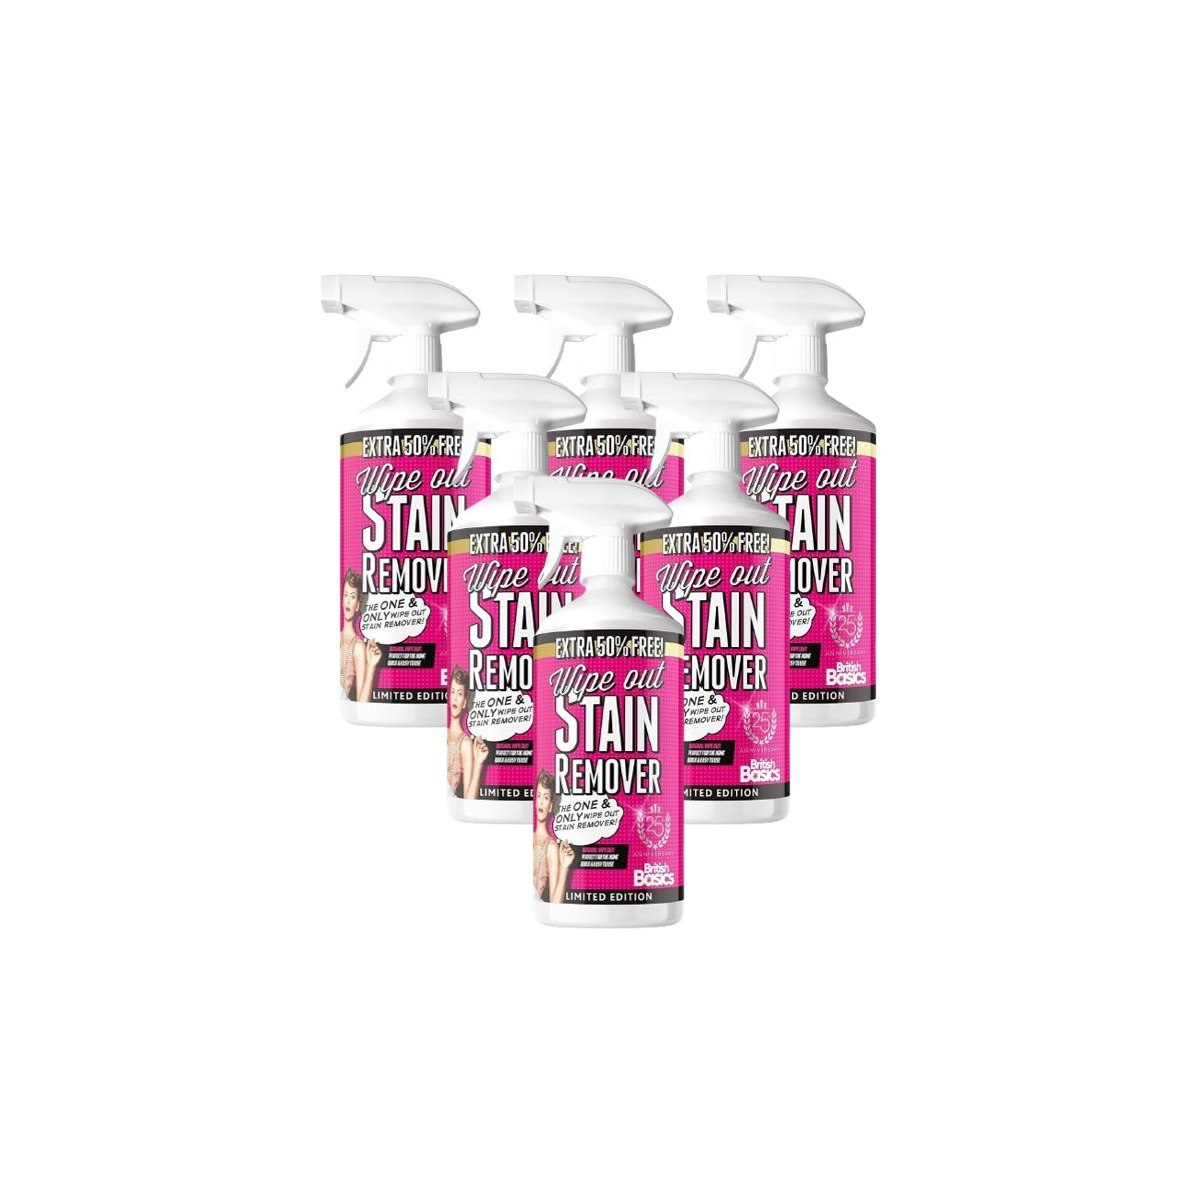 Case of 6 x British Basics Wipe Out Stain Remover Spray 50% Extra Free 750ml 